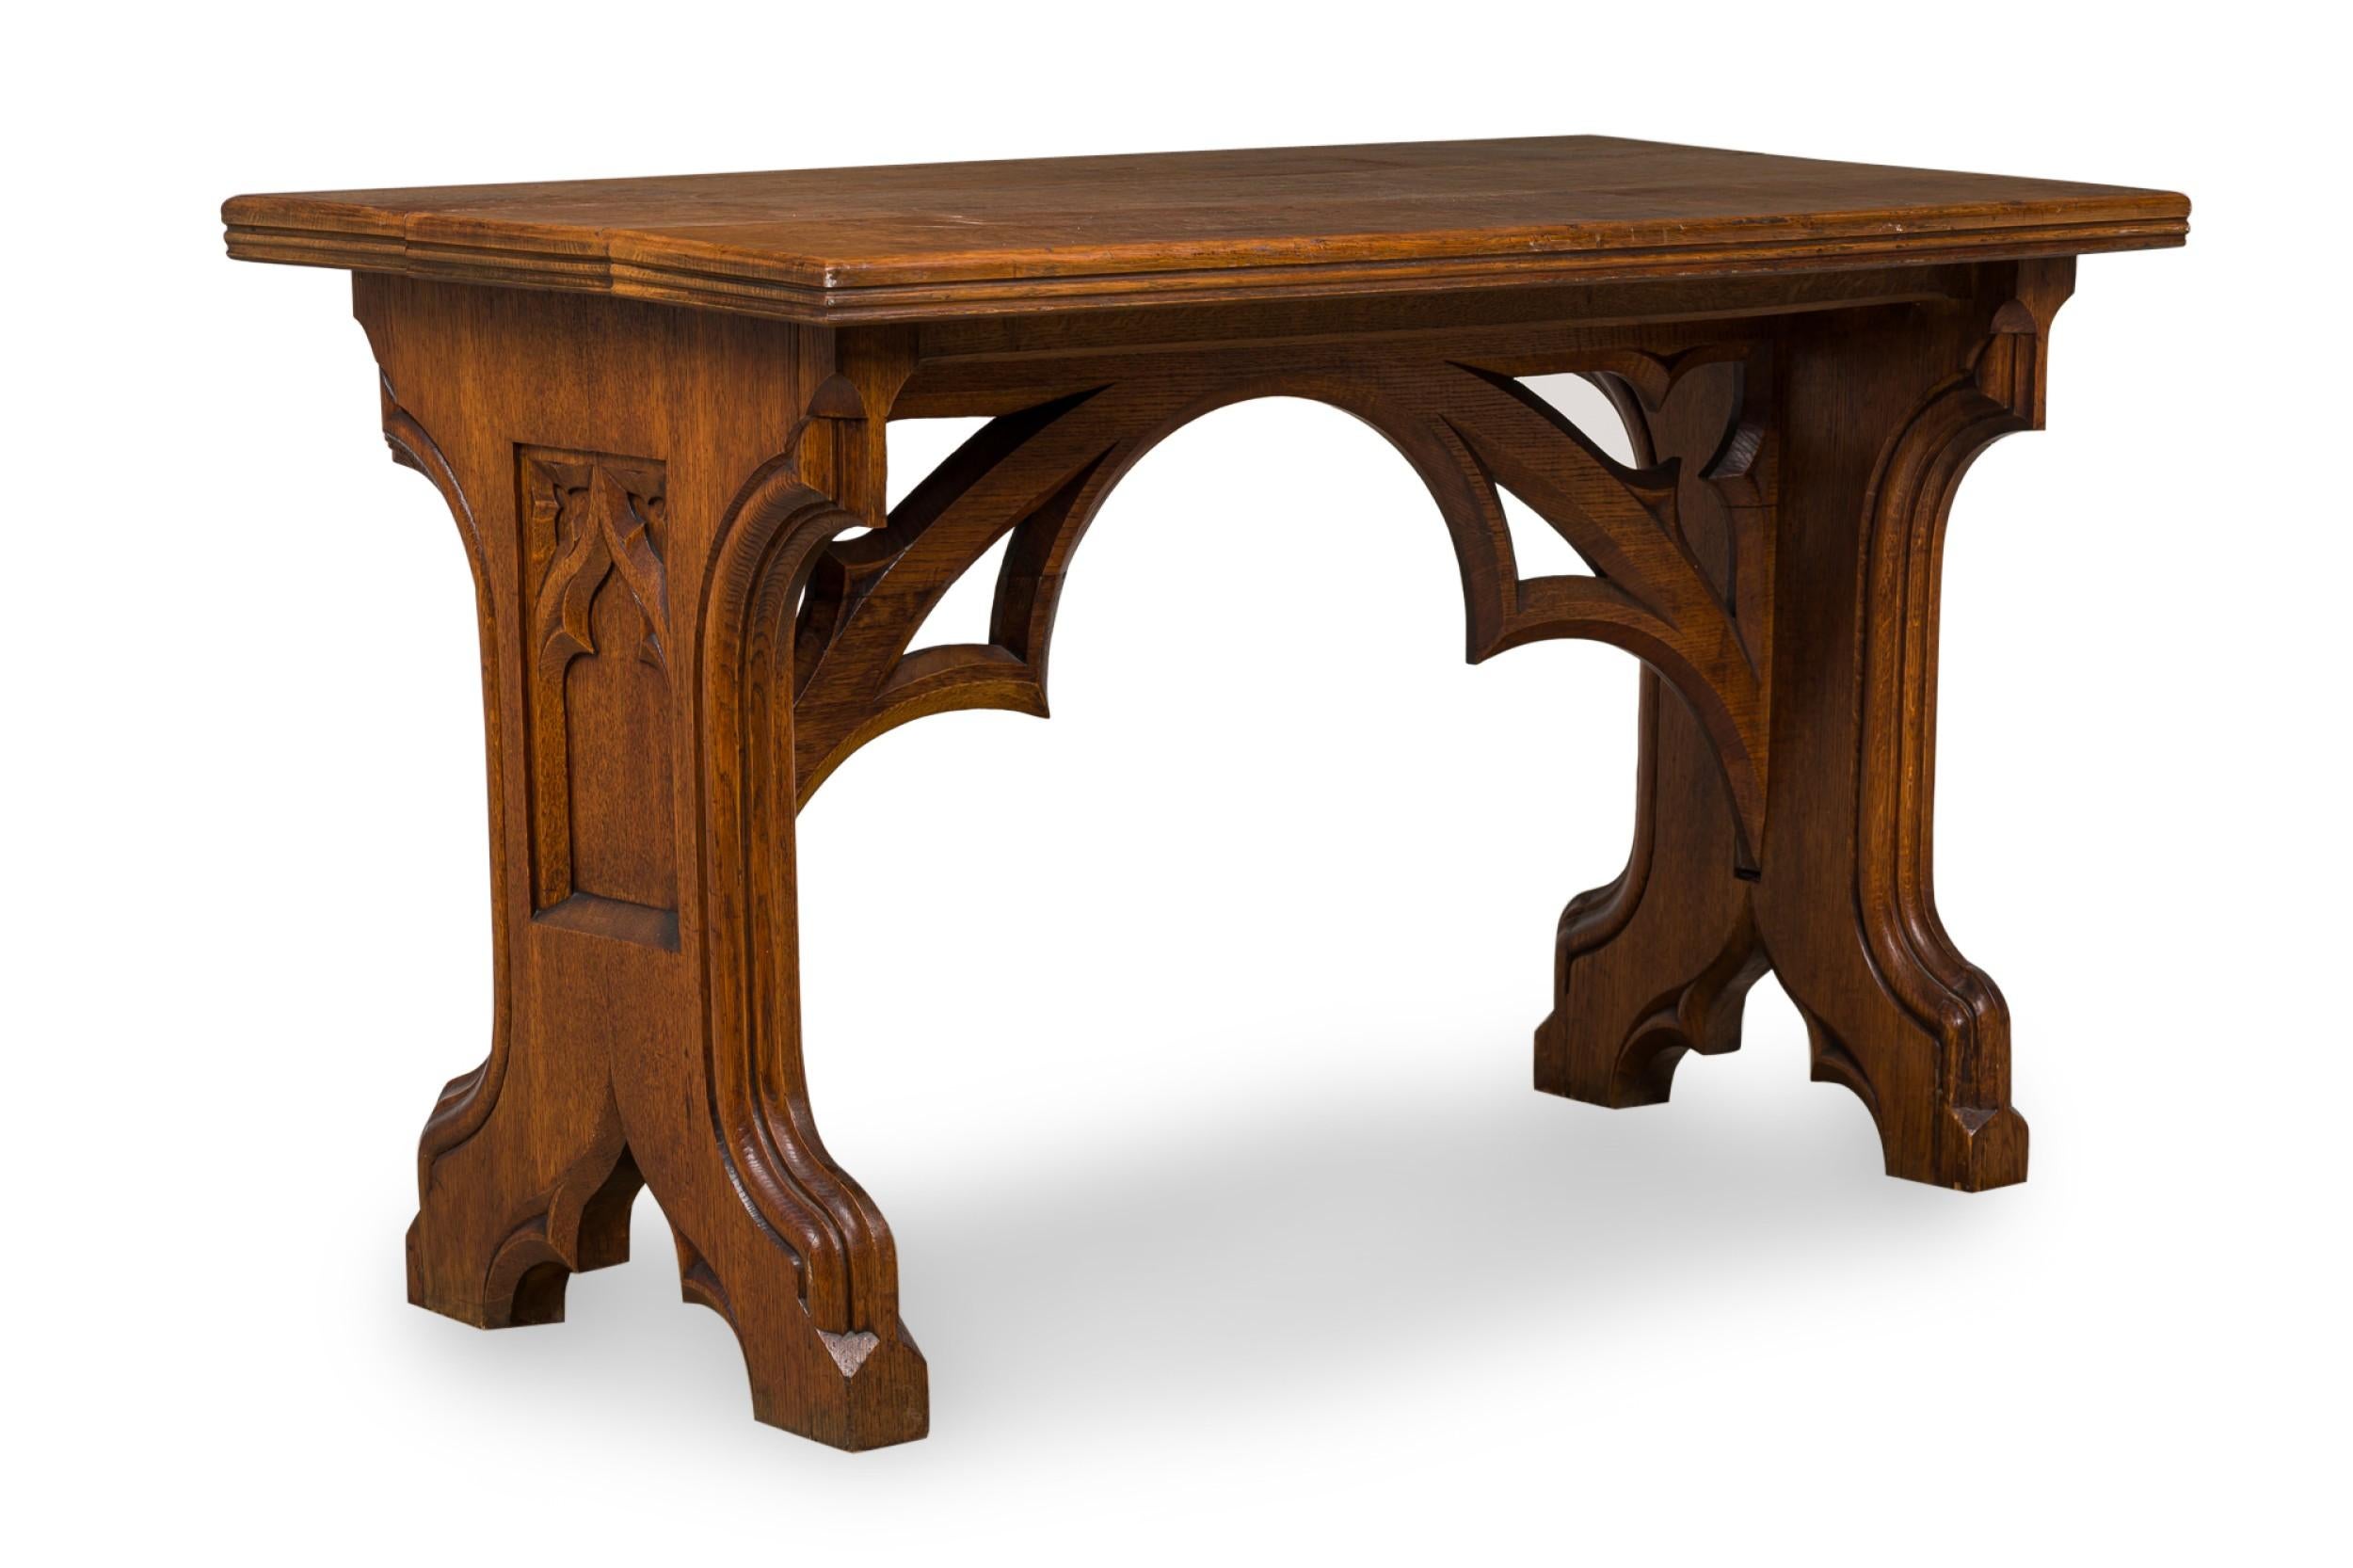 19th Century English Victorian Gothic Revival Carved Oak Table For Sale